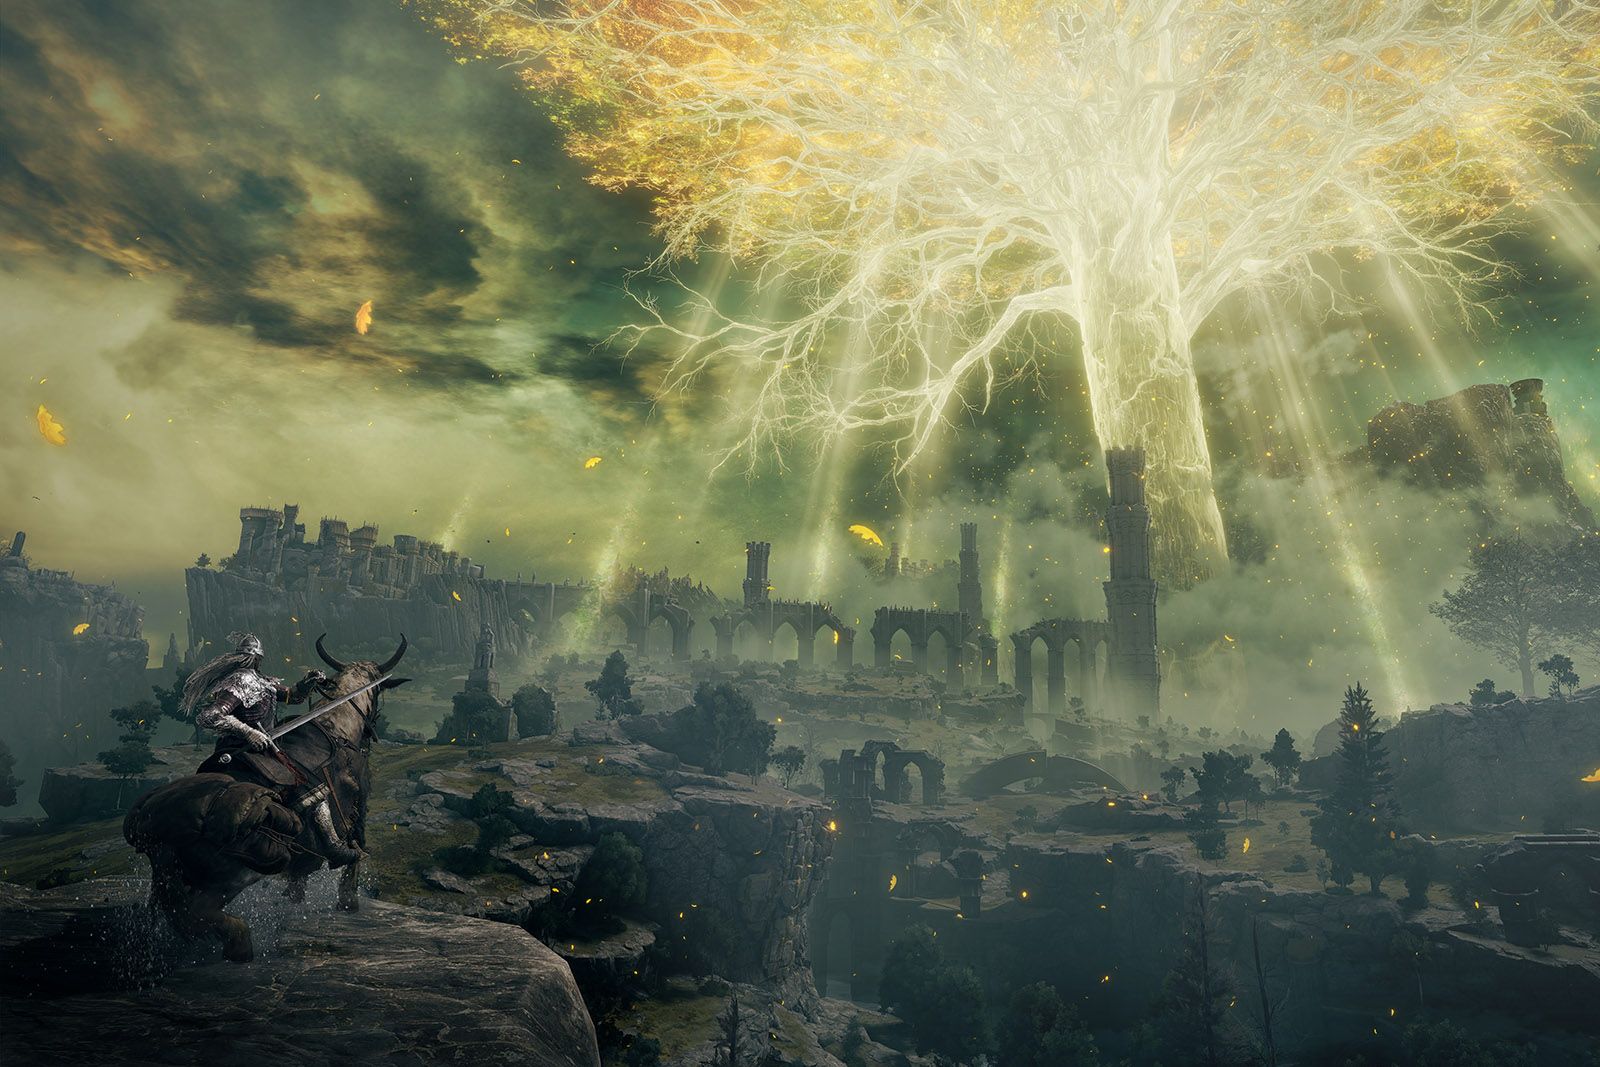 Elden Ring tips and tricks: Hints for getting started with FromSoftware's latest game photo 6